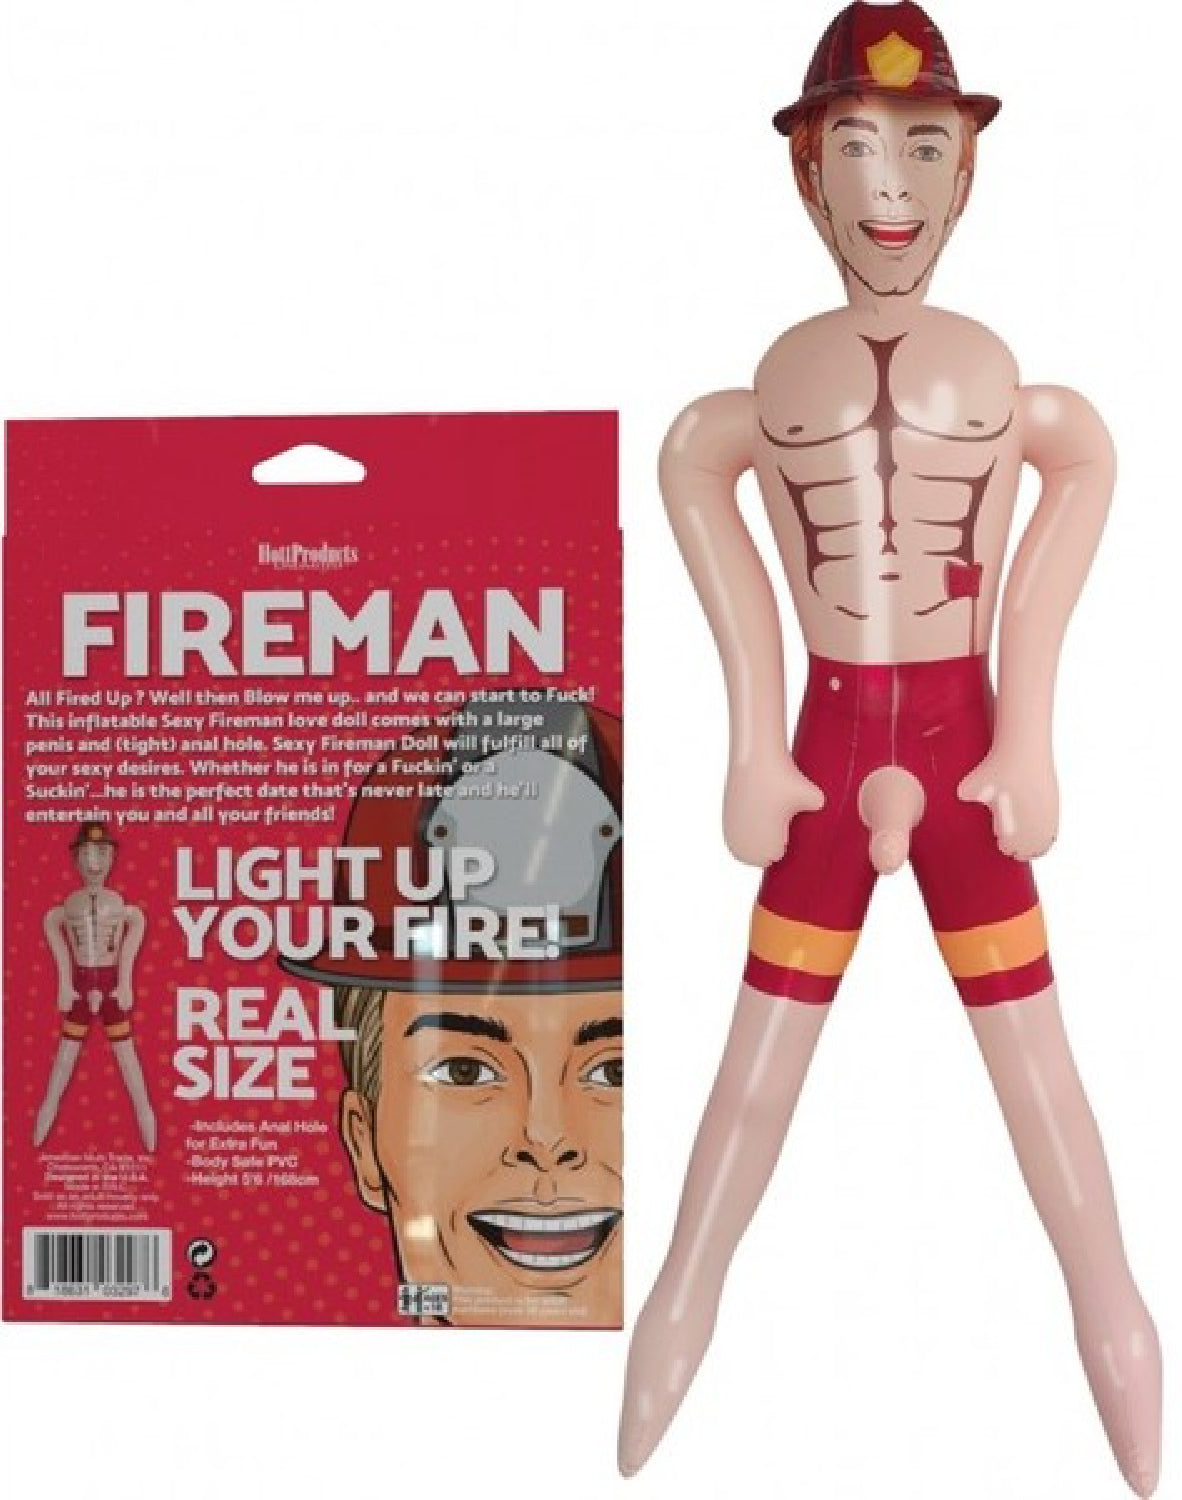 Fireman Inflatable Doll - One Stop Adult Shop